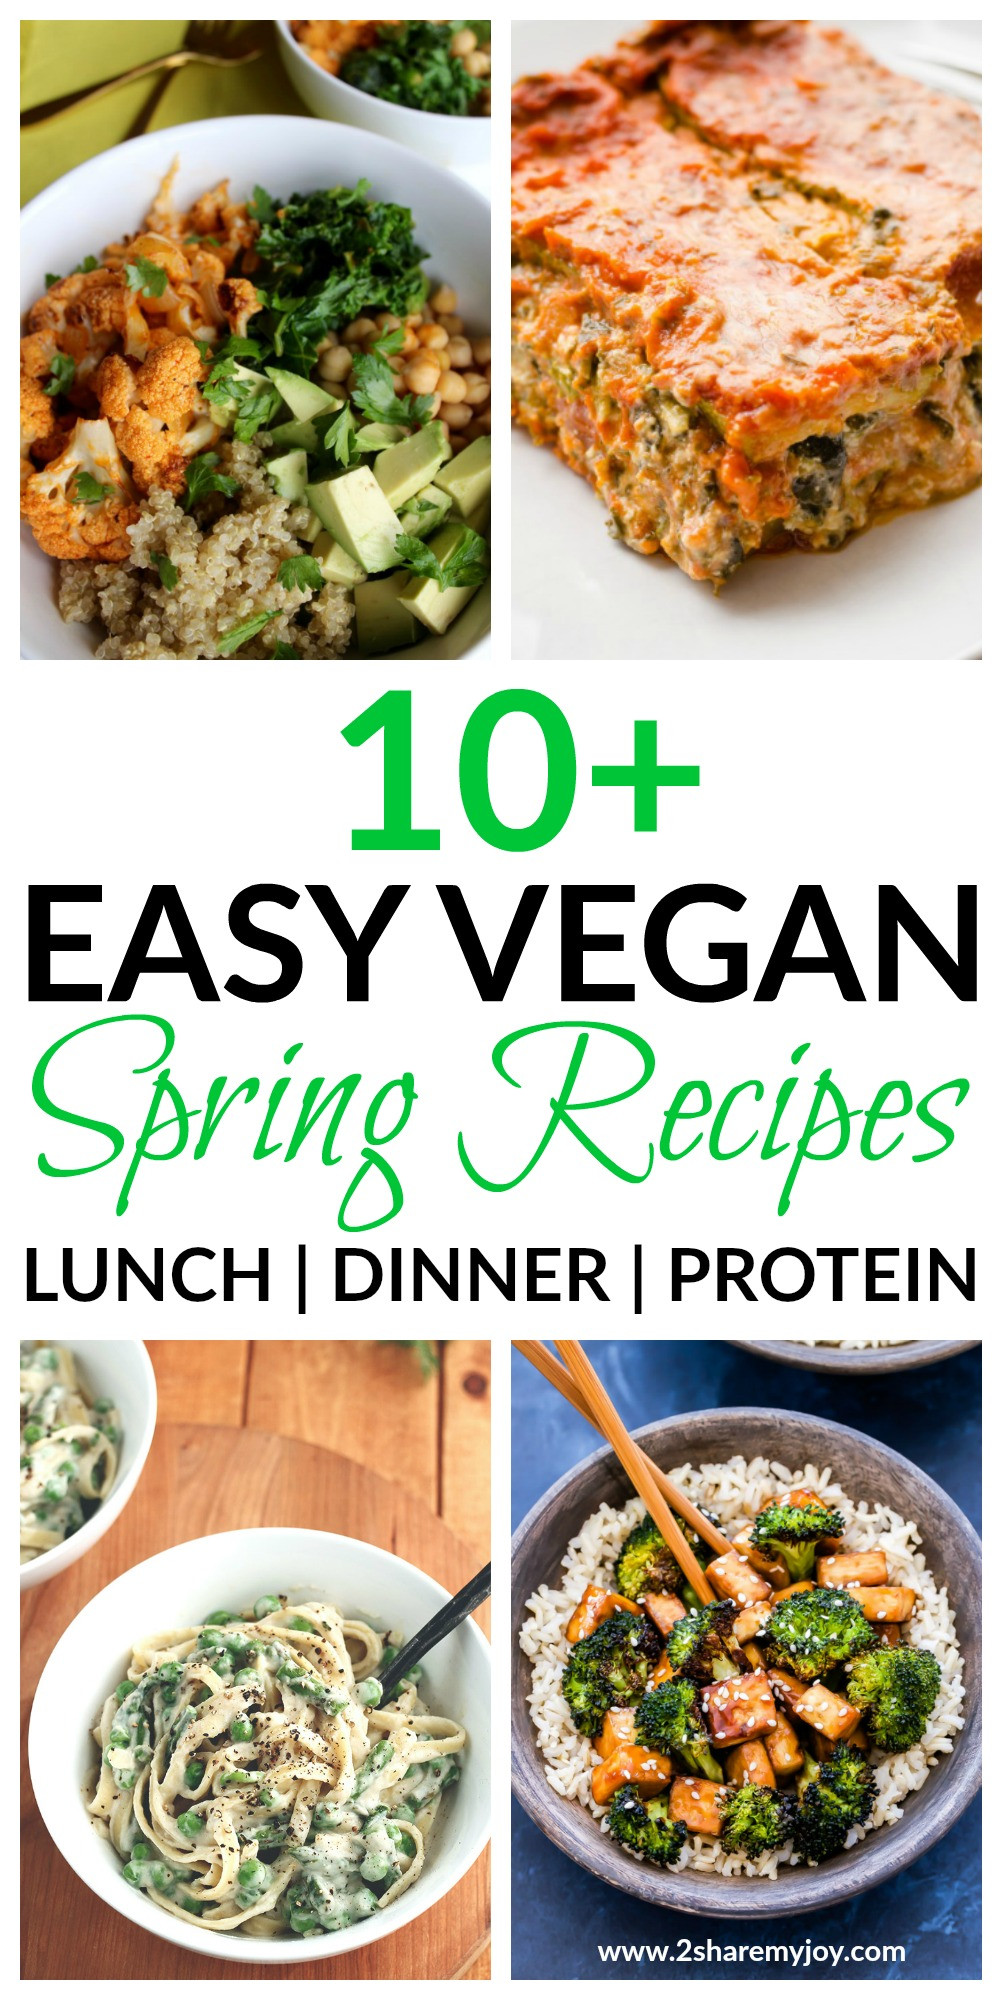 Vegan Spring Recipes
 20 Easy Vegan Spring Recipes for lunch or dinner